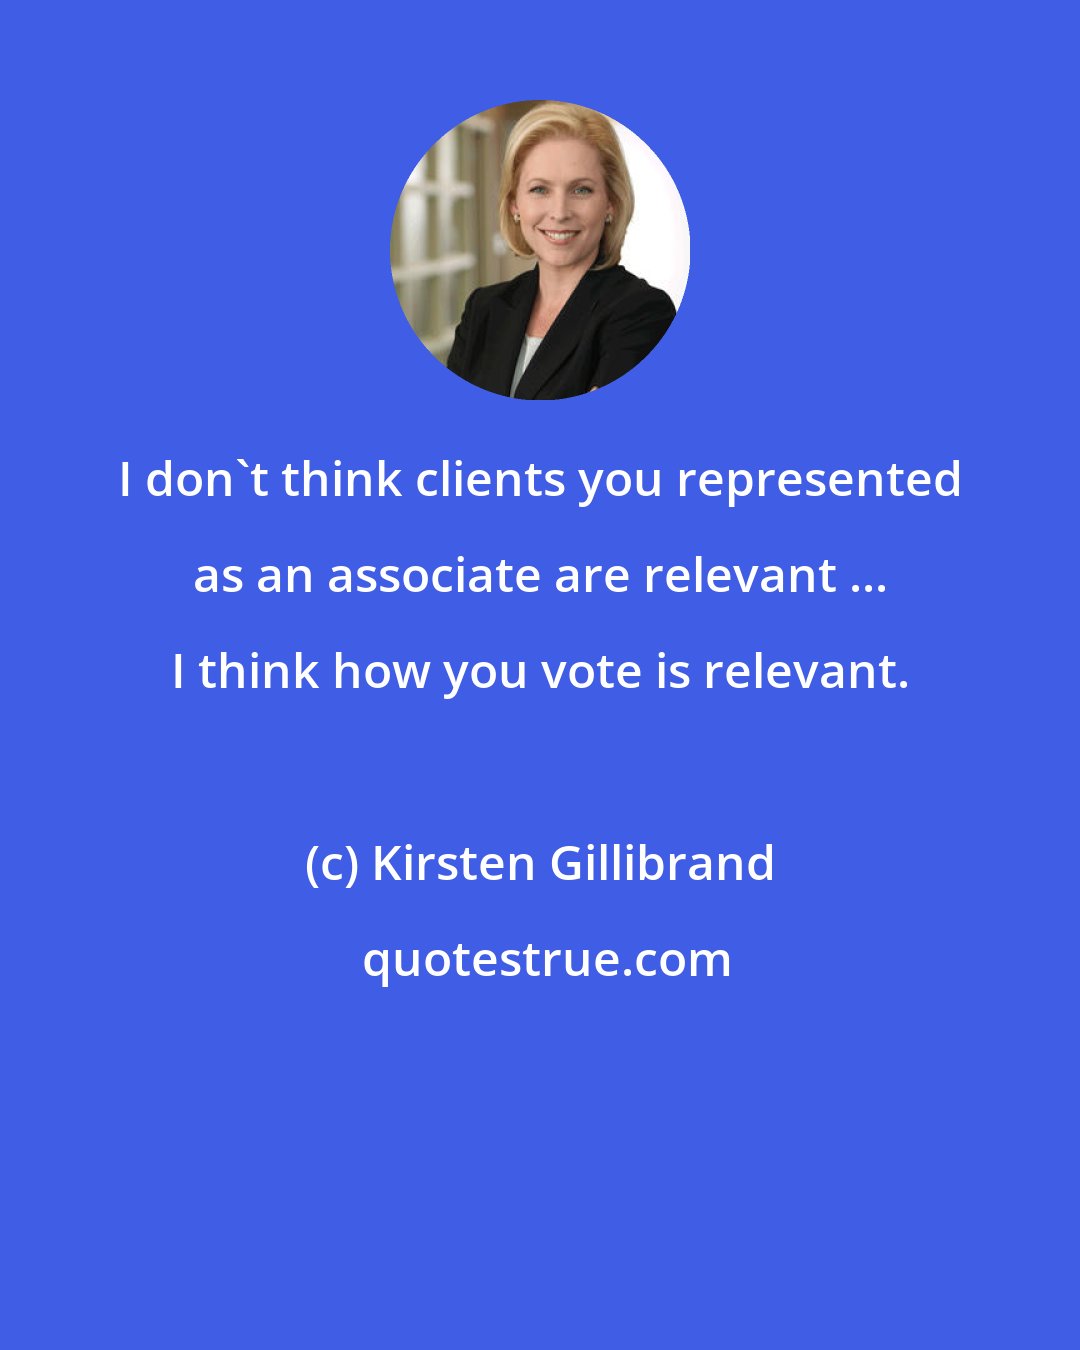 Kirsten Gillibrand: I don't think clients you represented as an associate are relevant ... I think how you vote is relevant.